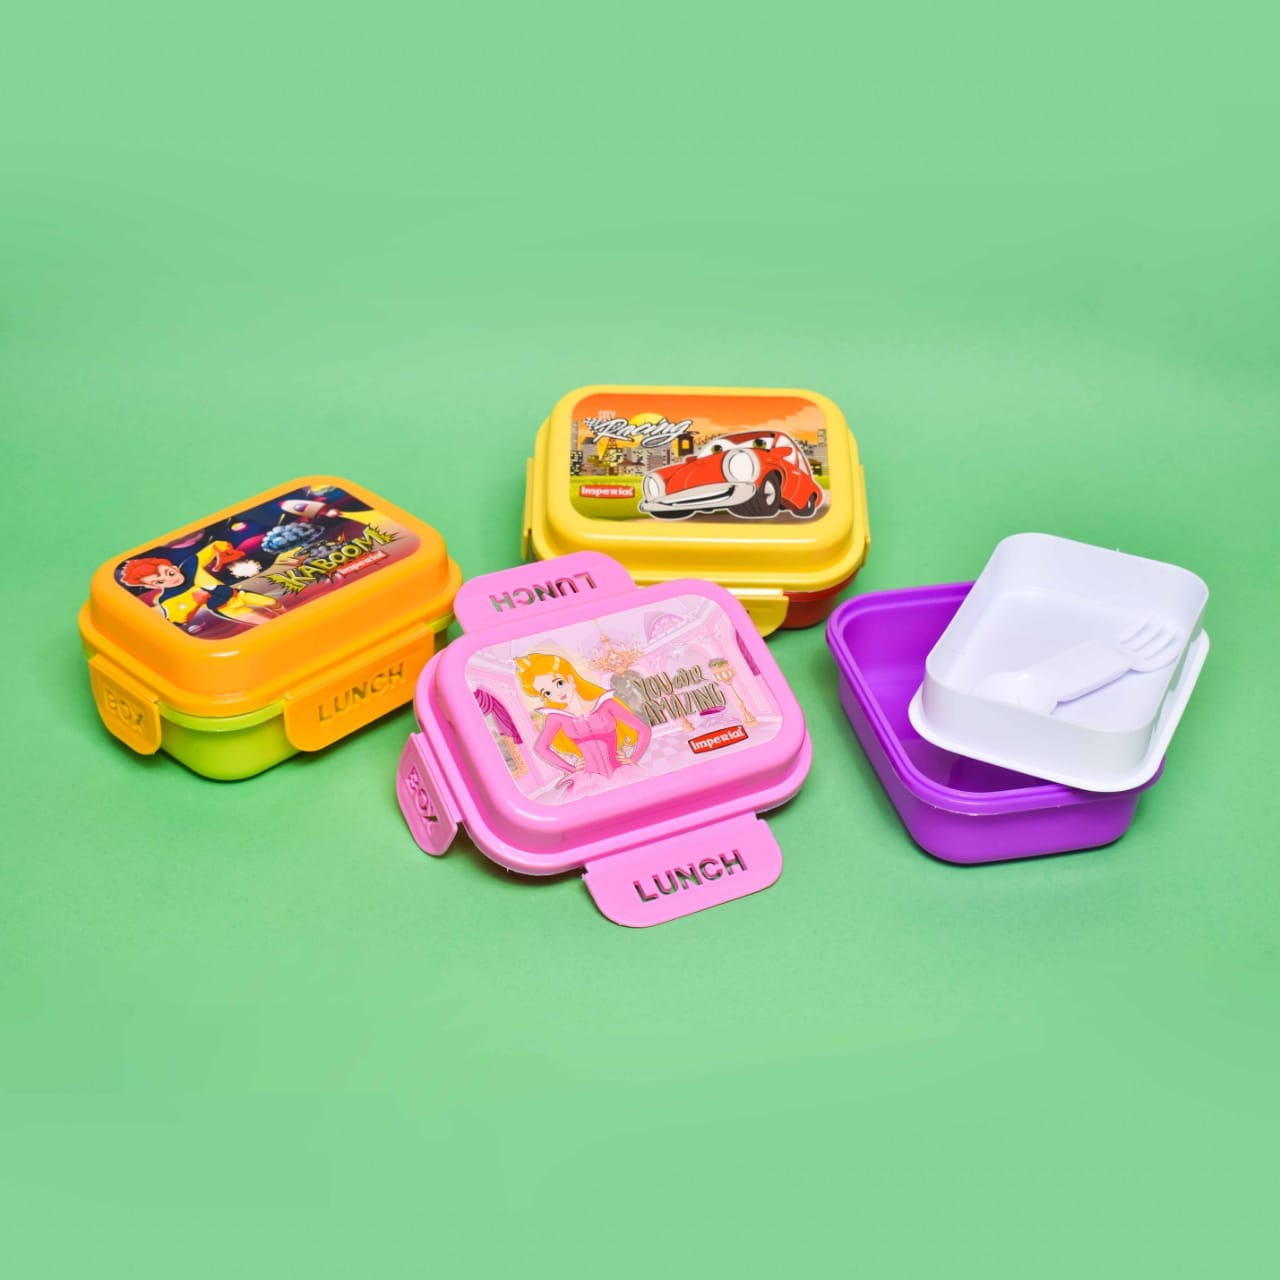 Rushab Plastic heavy standards tiffin box for kids- BPA free plastic with compartments